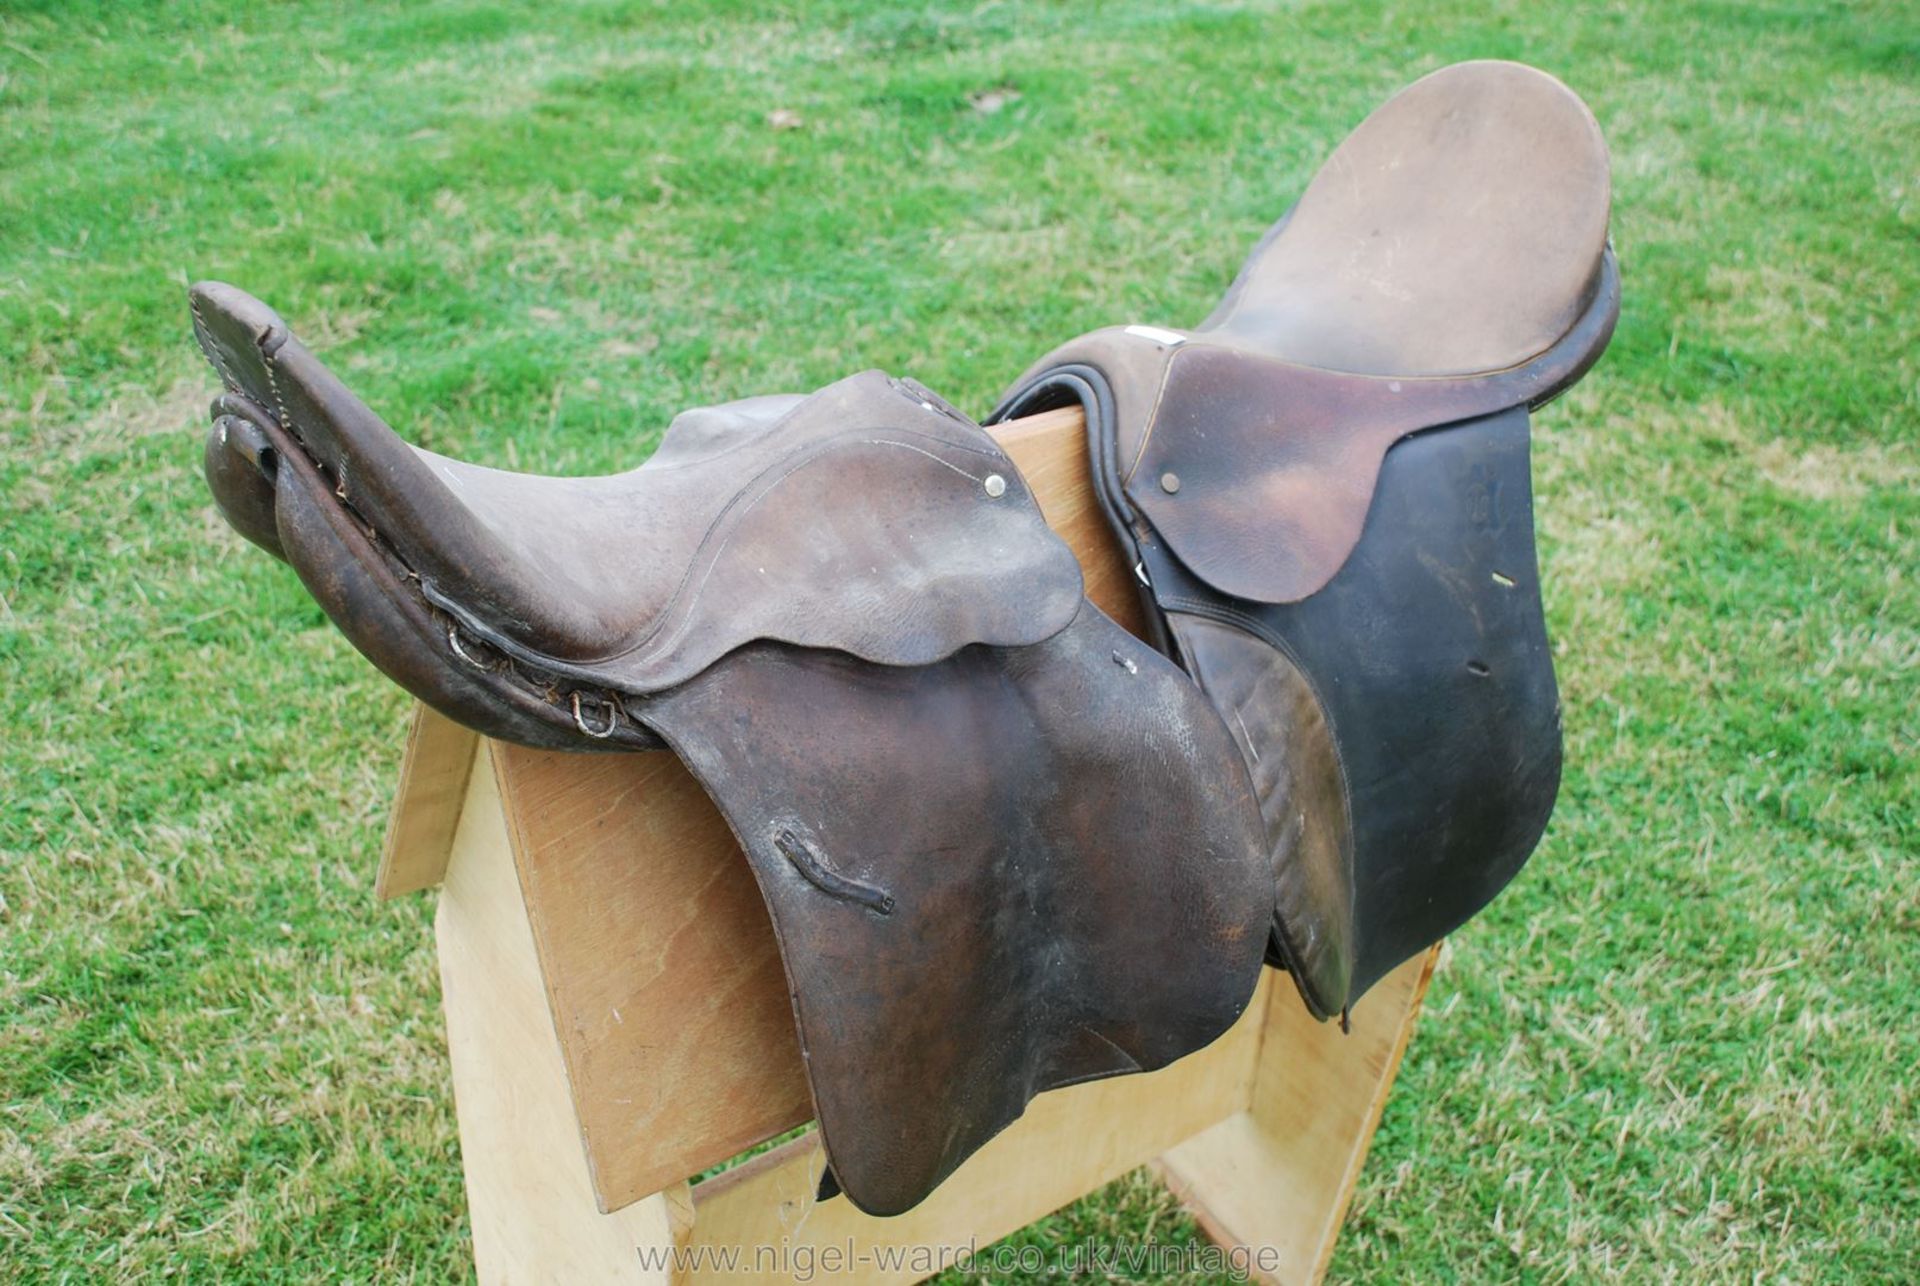 Two brown leather general purpose Saddles, believed English, 16'' approx. on a wooden horse. - Image 2 of 2